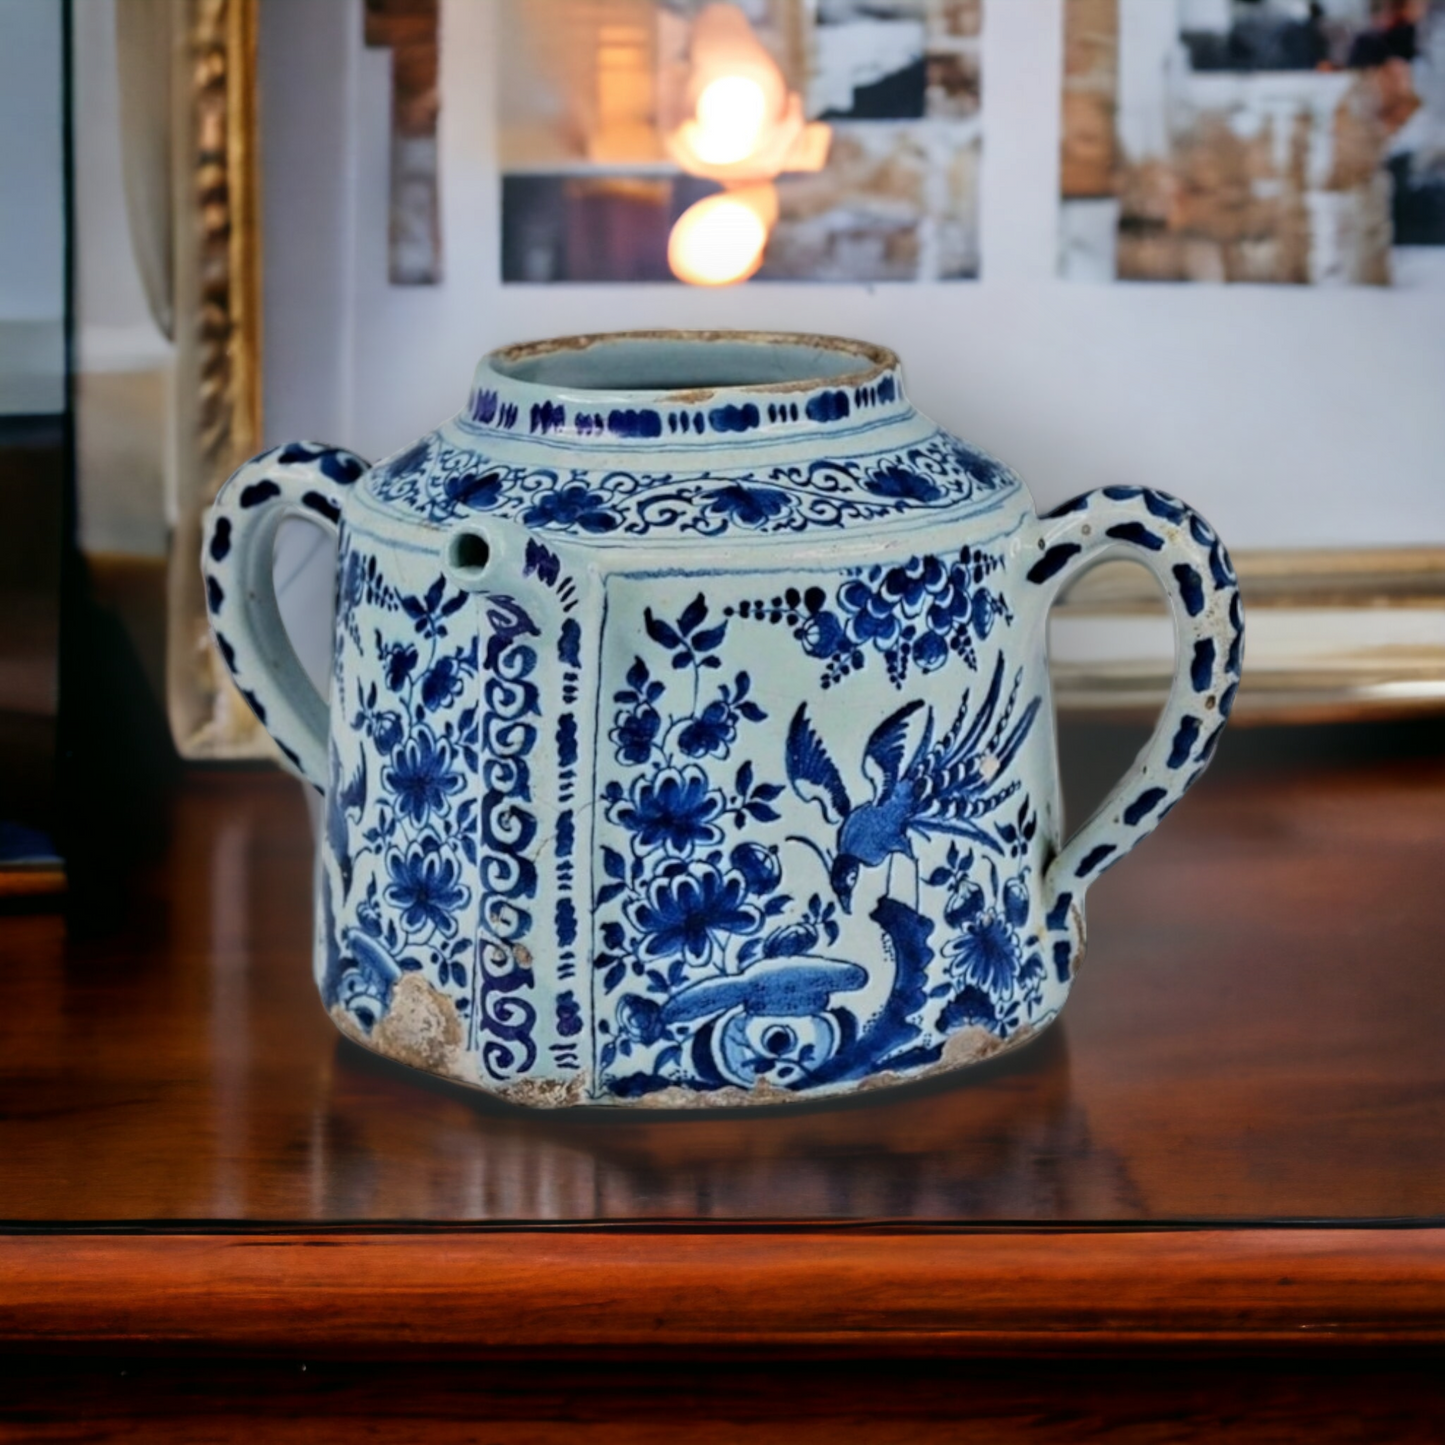 Early 18thC English Antique Blue & White Delftware Posset Pot, Attributed to Lambeth, London, Circa 1720